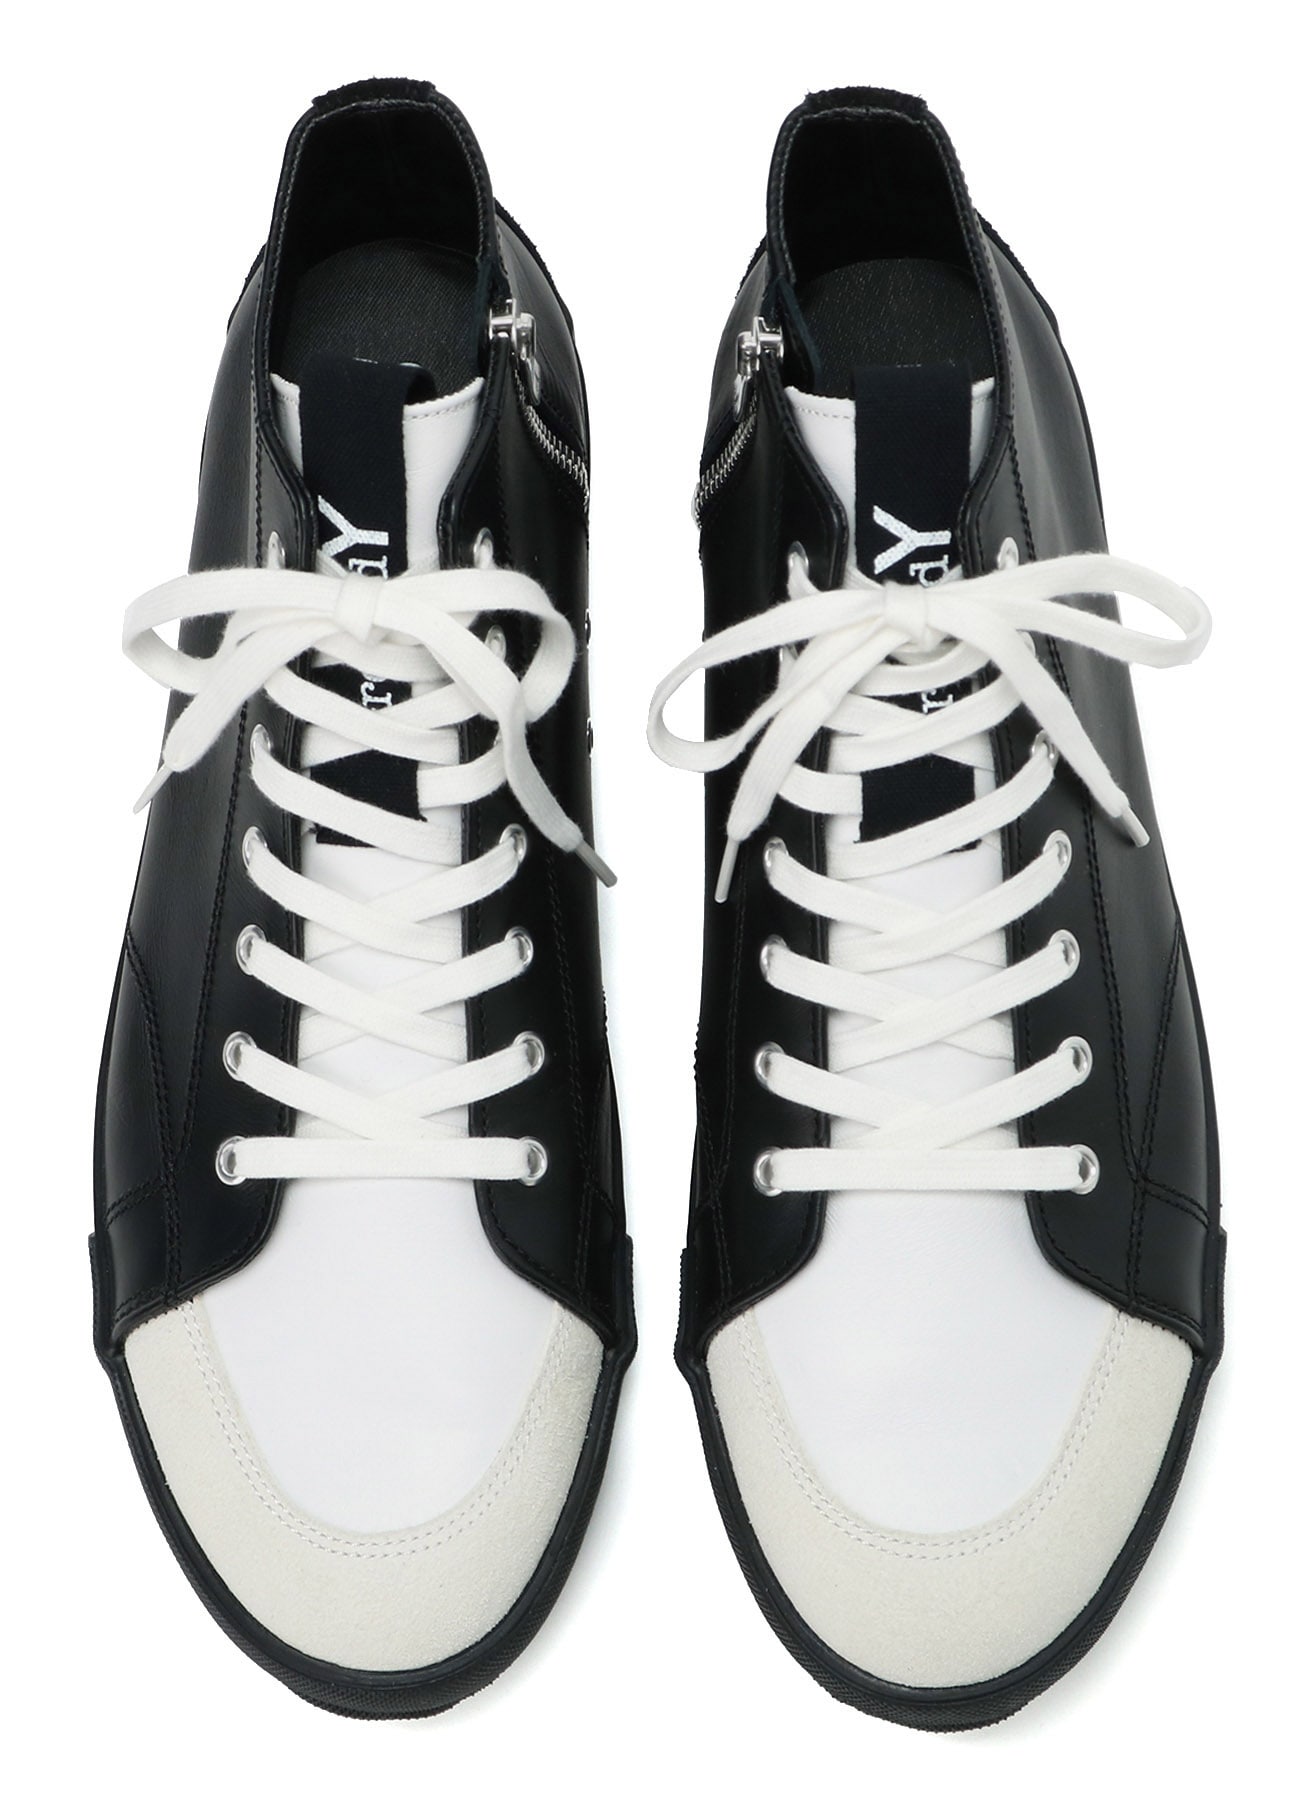 MONOCHROME LEATHER SNEAKERS